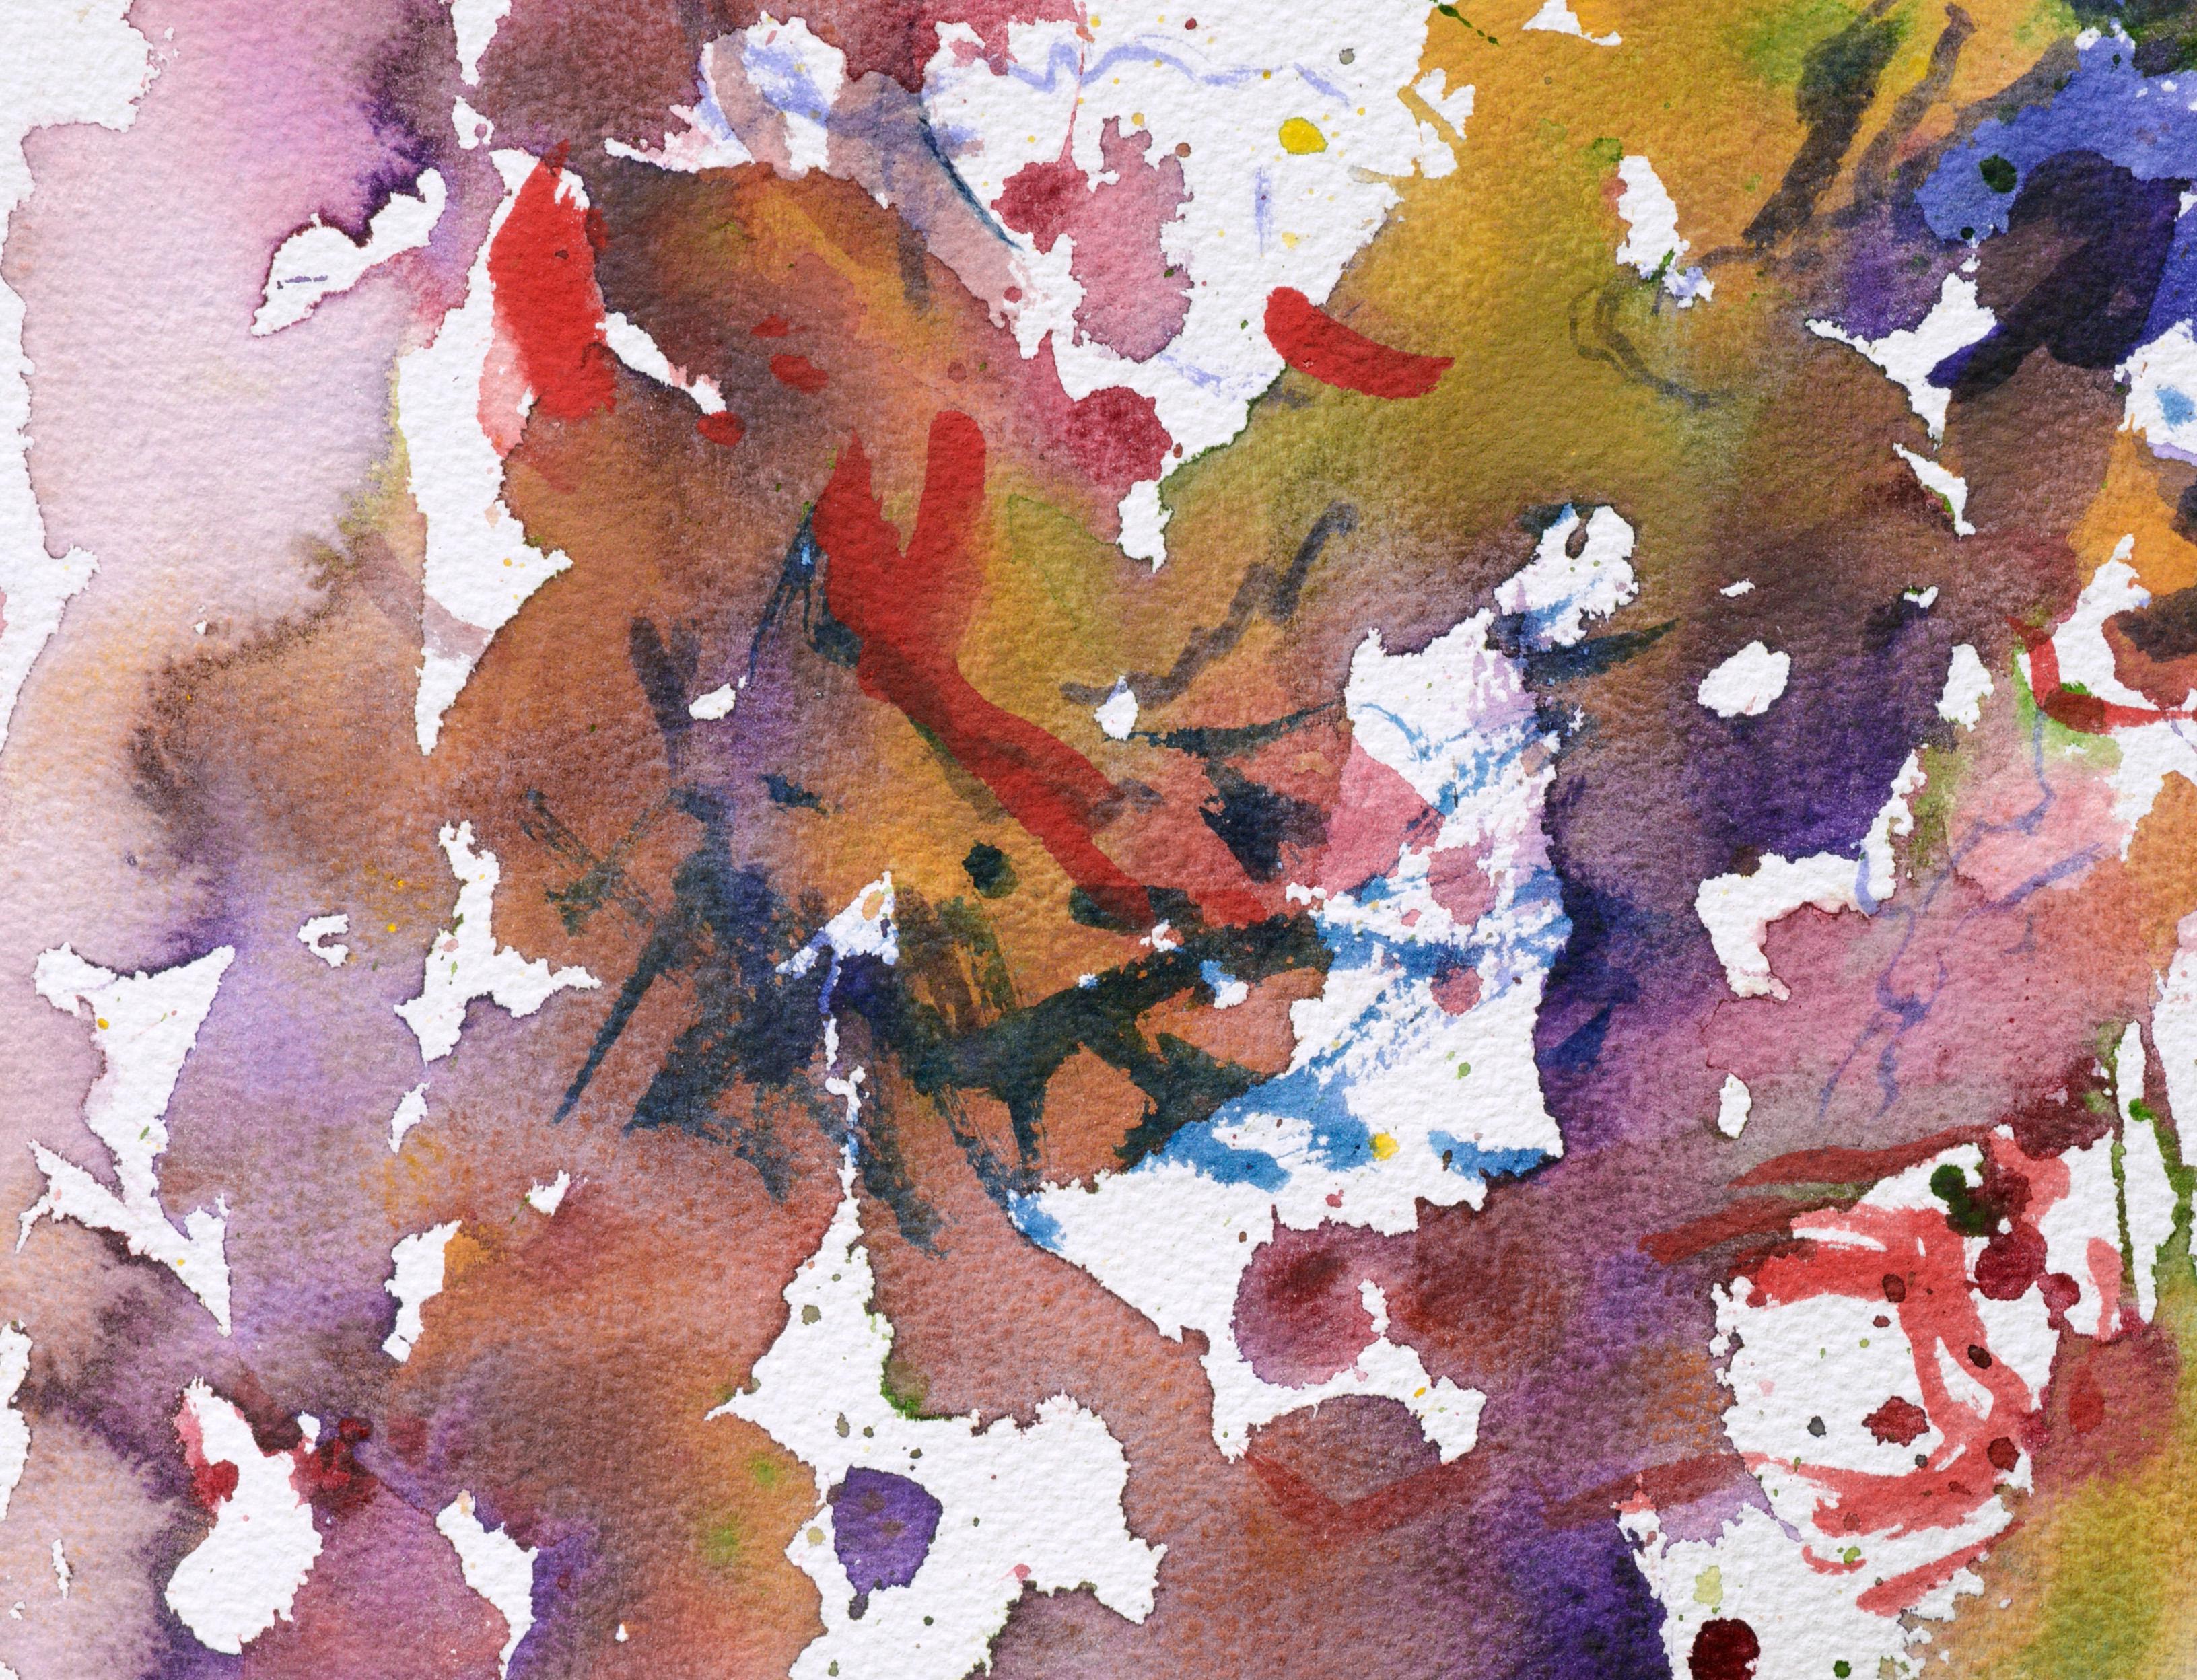 Abstract Splashes of Yellow, Red, and Purple - Gray Abstract Drawing by Les Anderson